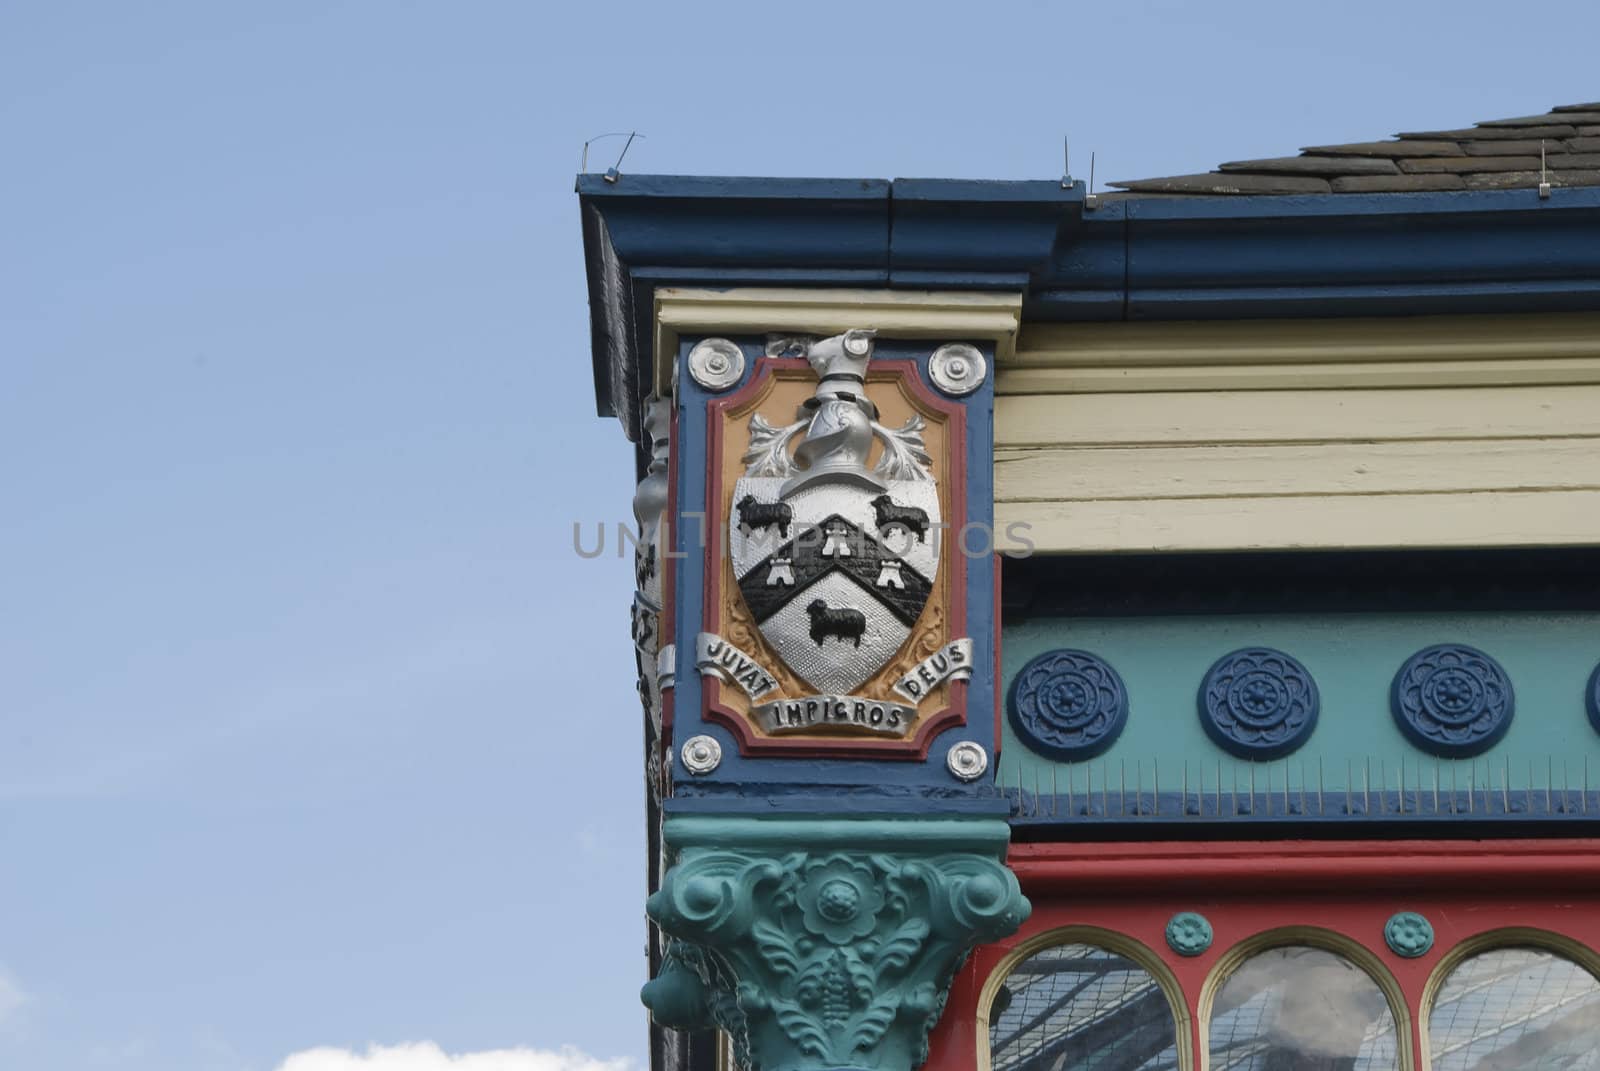 Huddersfield Coat of Arms by d40xboy